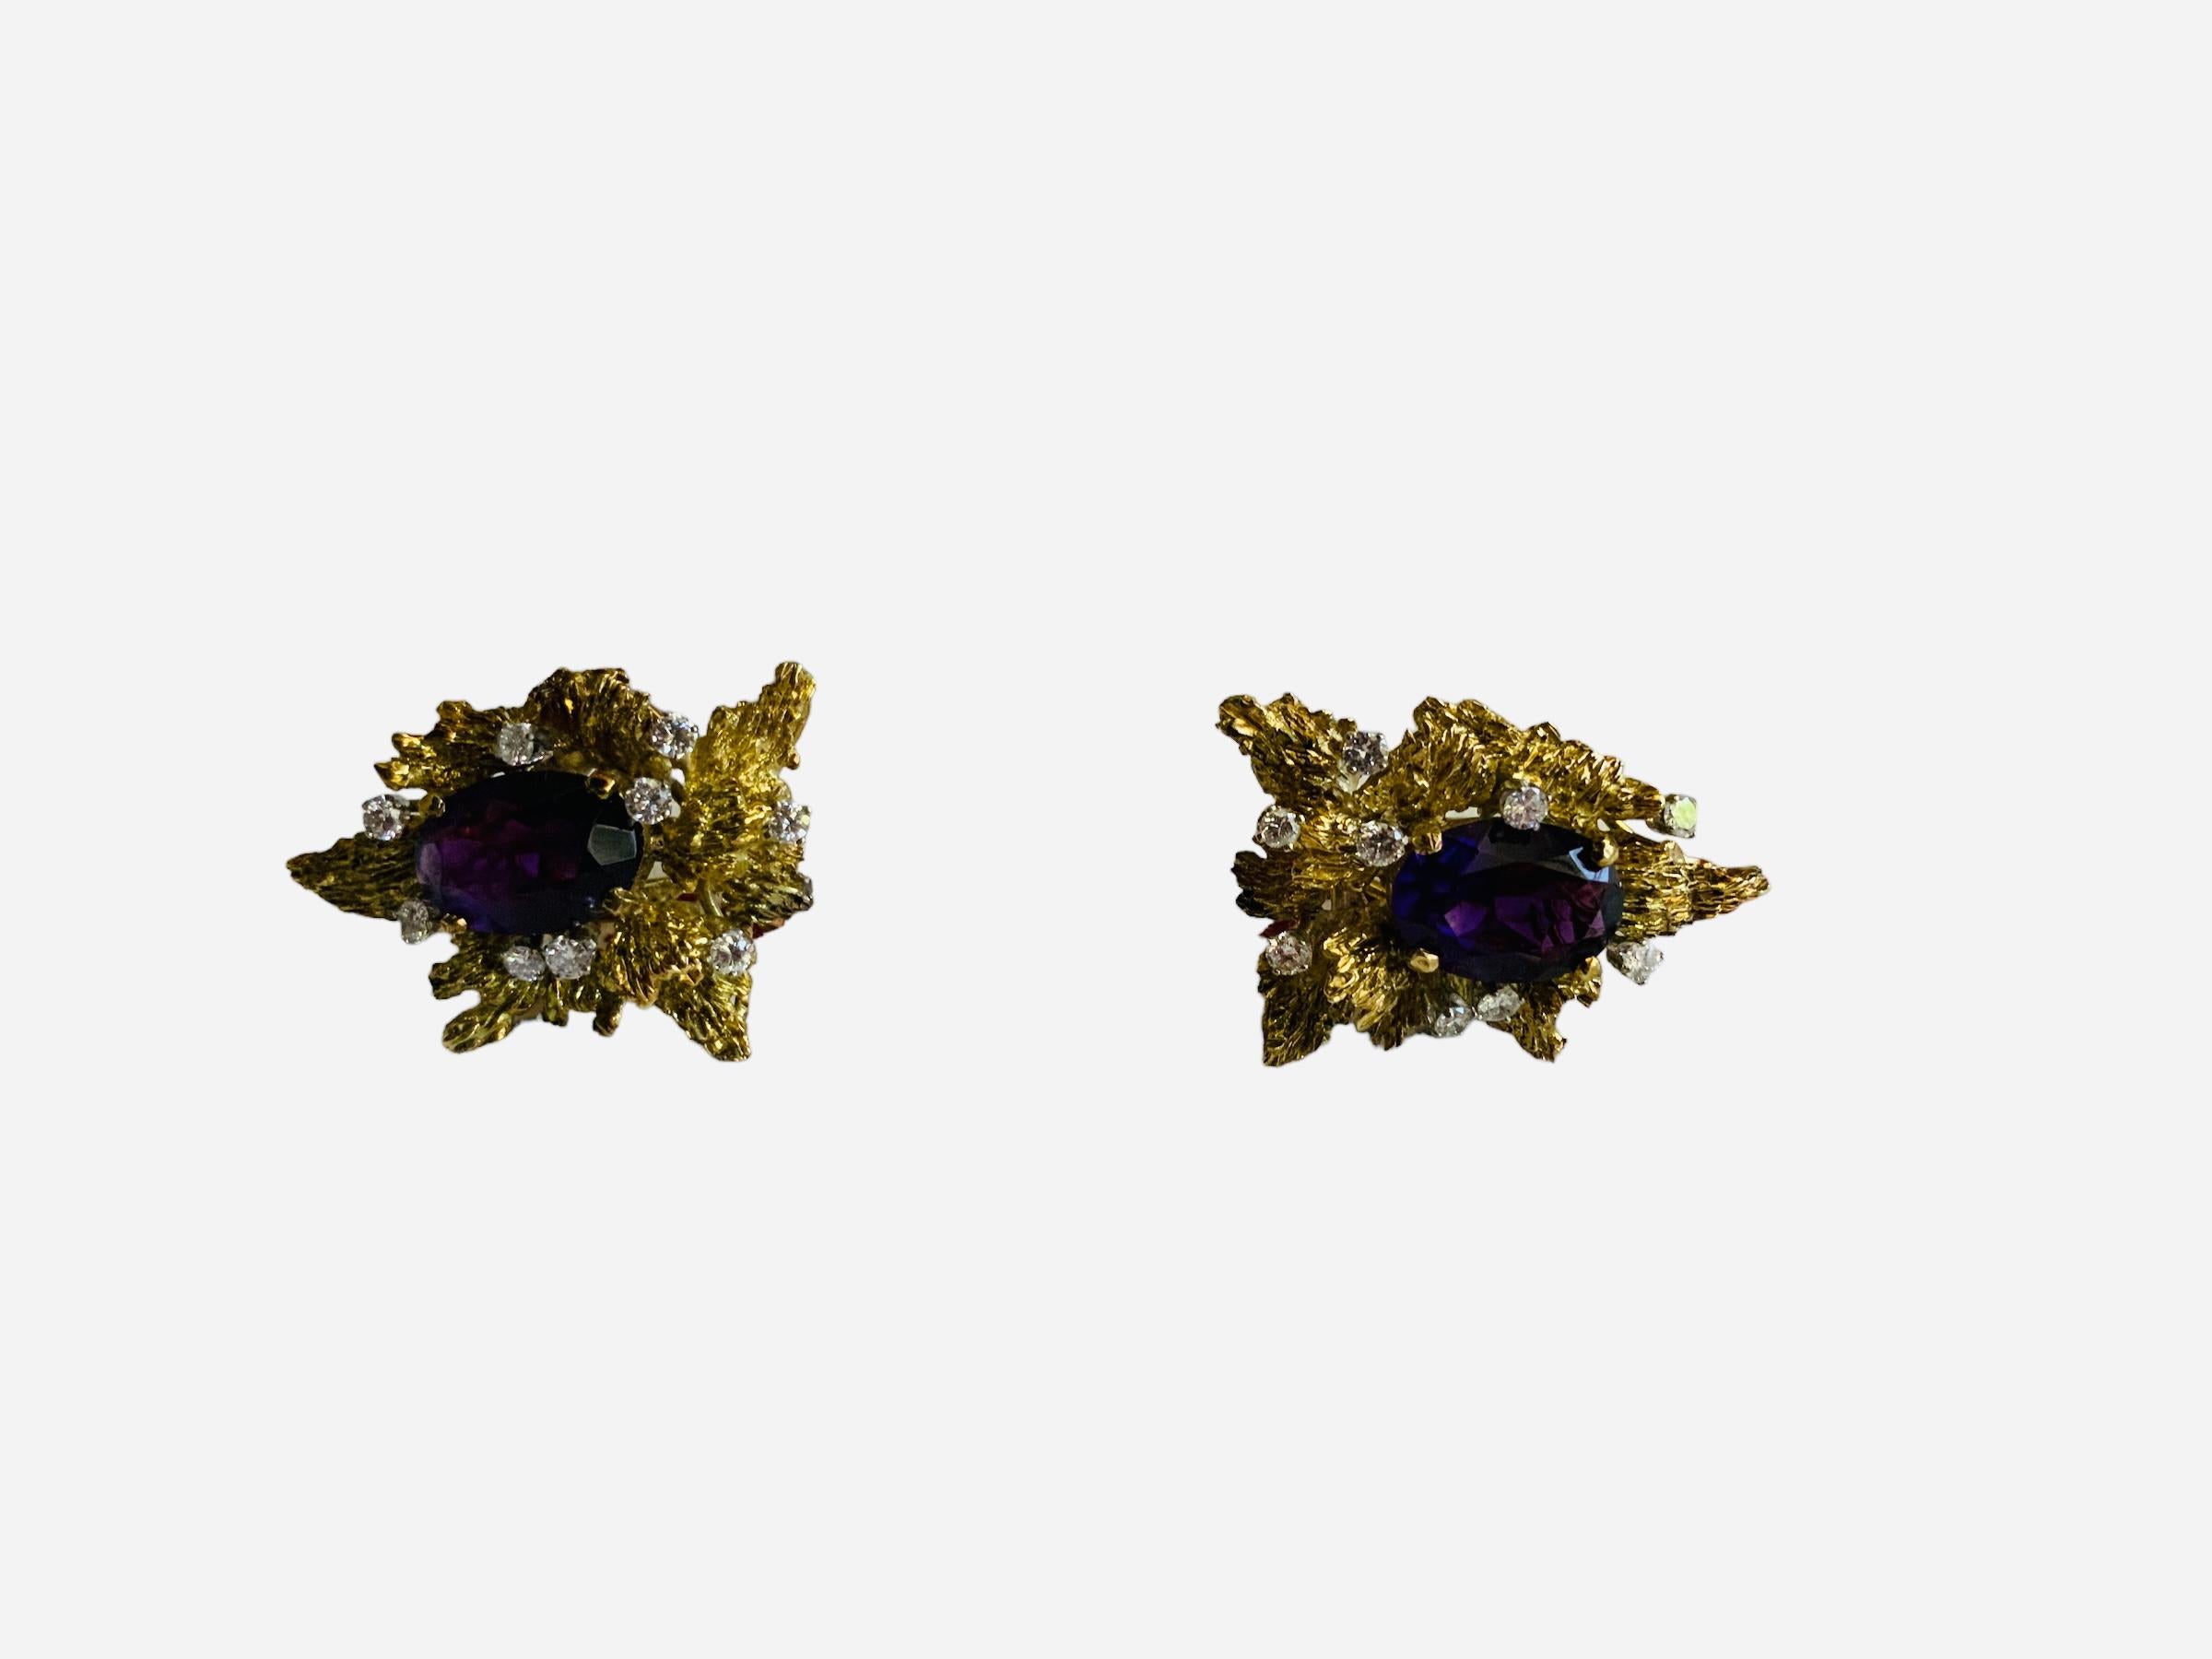 Brutalist Style Pair Of 14K Gold Amethyst And Diamonds Earrings  For Sale 2